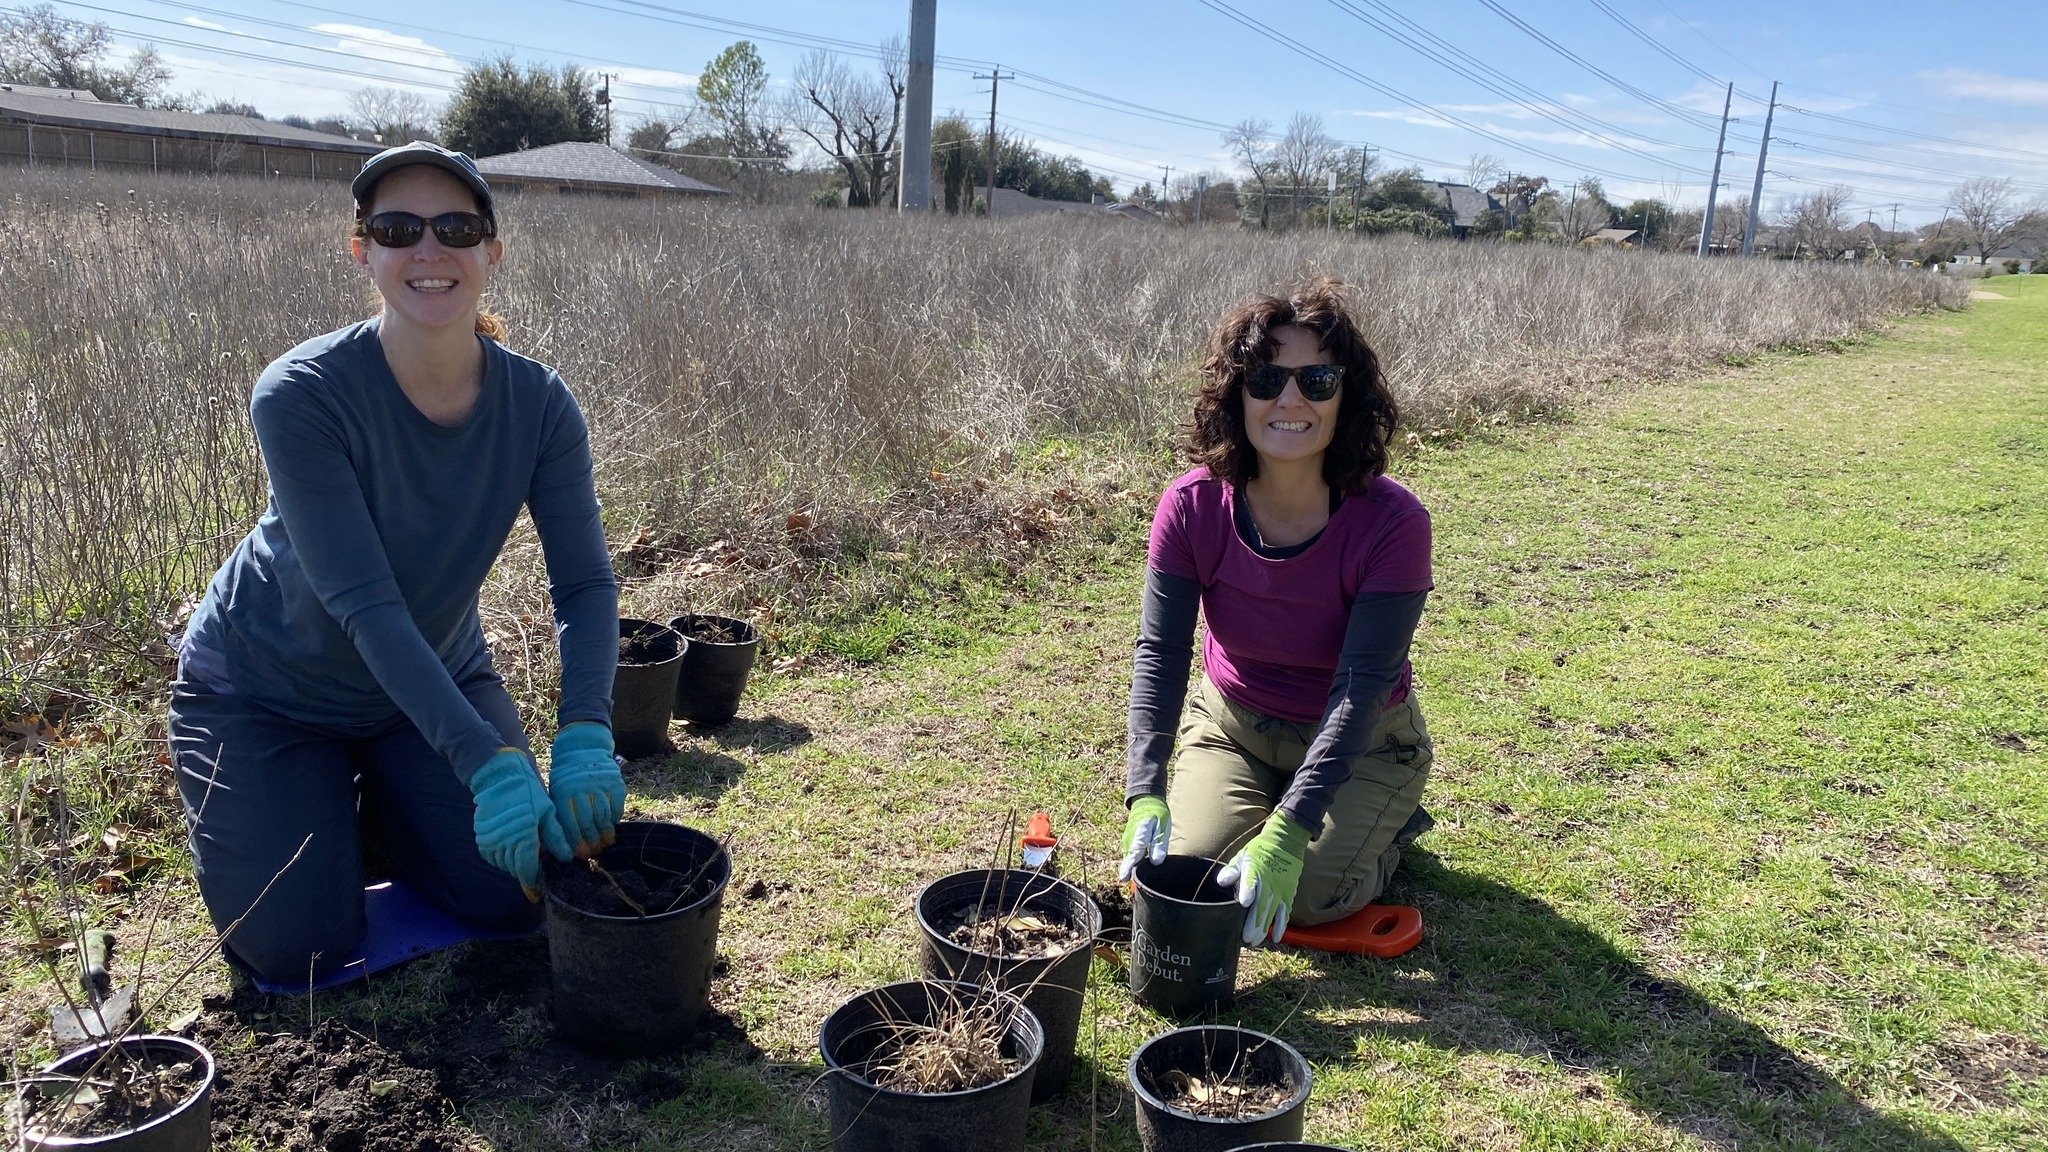 We have two trail work days coming up. Saturday, 5/11 is a prairie weeding and clean up, and Saturday, 5/18 is a planting day near Royal Park. All the details are on our events page here: https://northaventrail.org/events/ (link in bio).

Please help